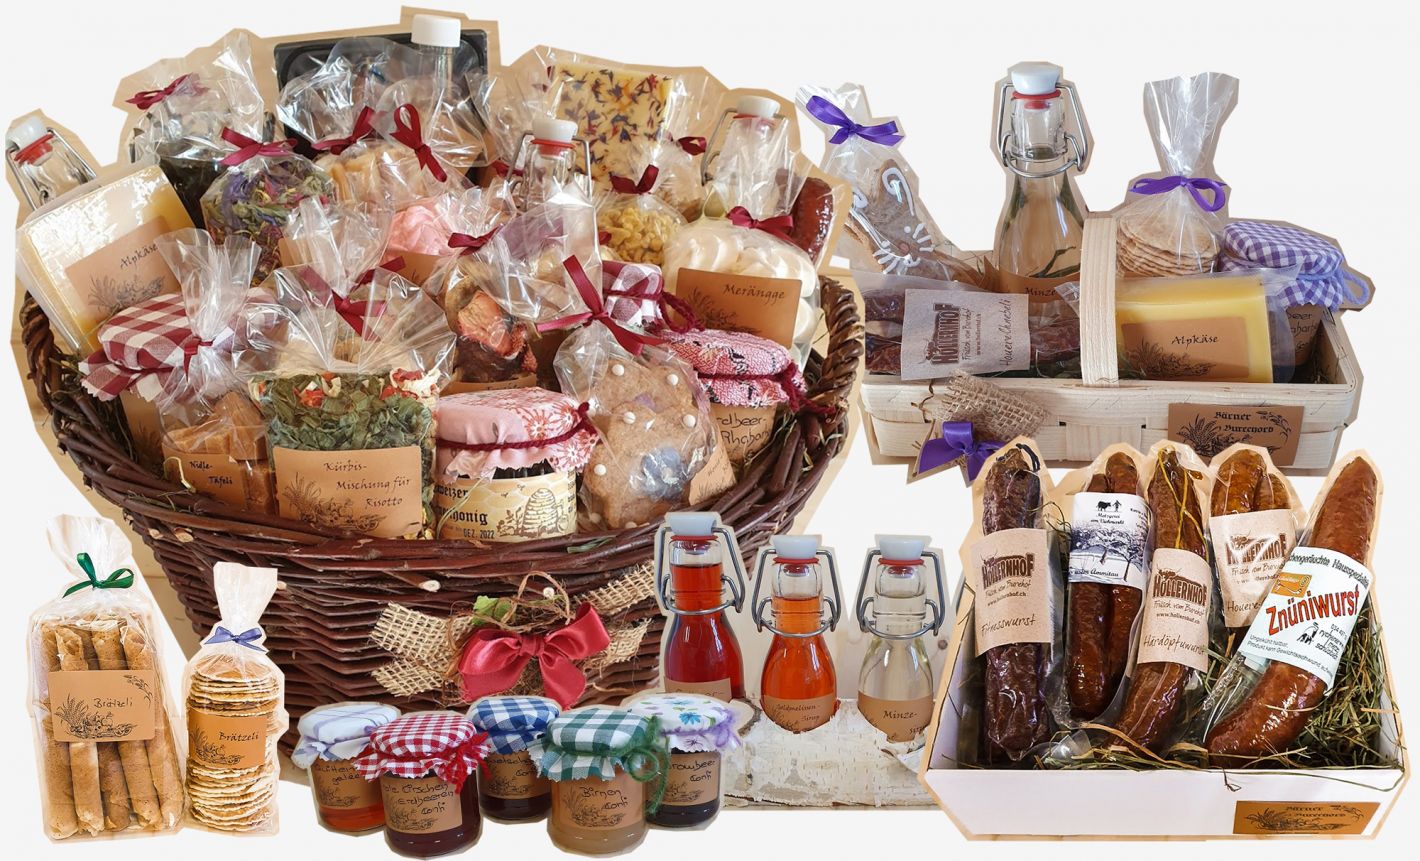 Picture collage of the fantastic offer of goodies from the burech basket.